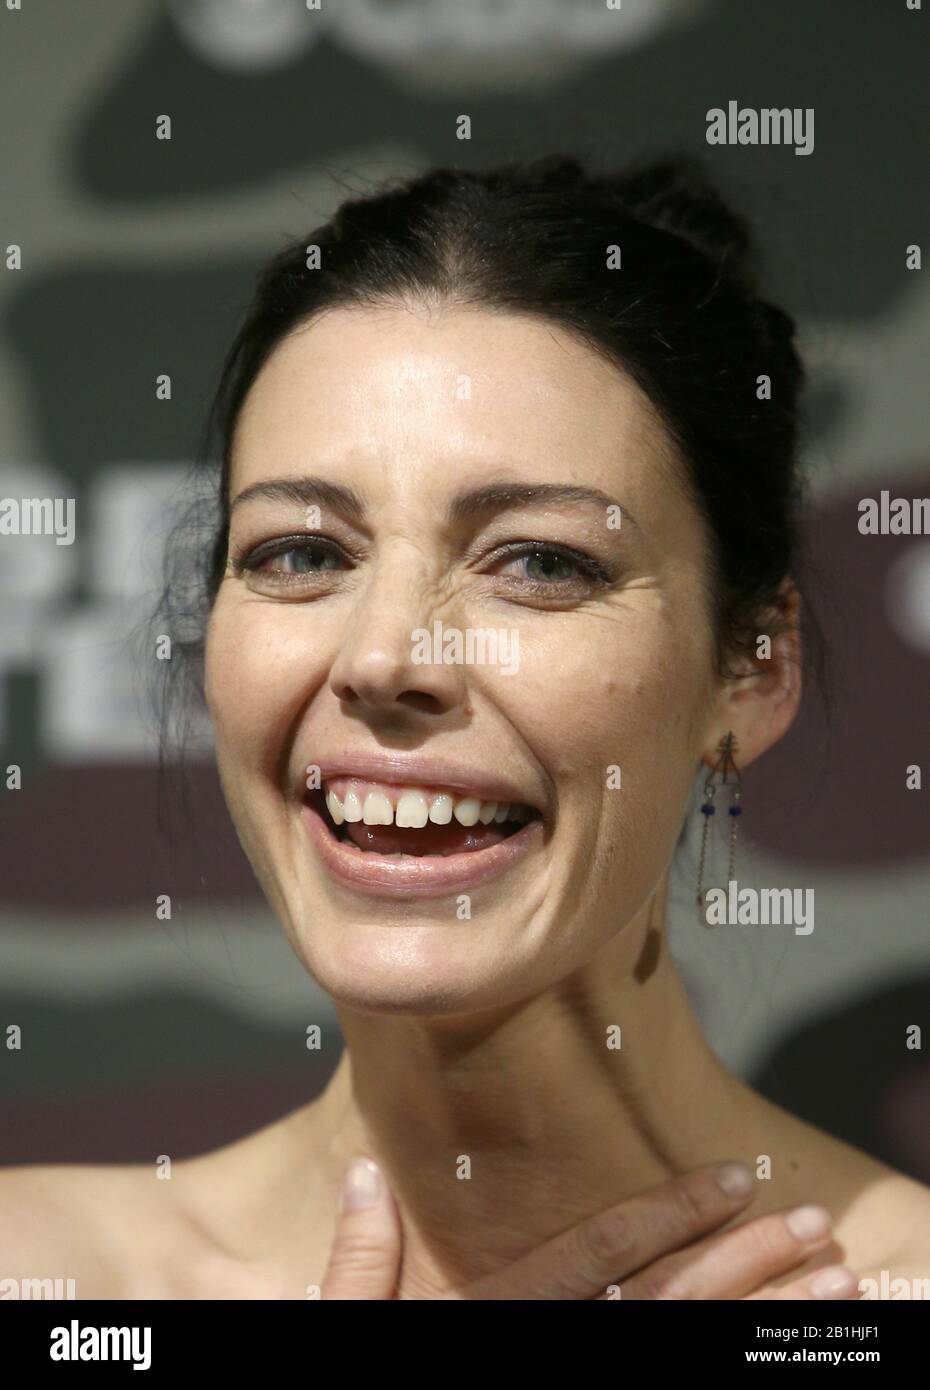 Hollywood, Ca. 25th Feb, 2020. Jessica Pare, at SEAL Team' TV show premiere at the Arclight in Hollywood, California on February 24, 2020. Credit: Faye Sadou/Media Punch/Alamy Live News Stock Photo